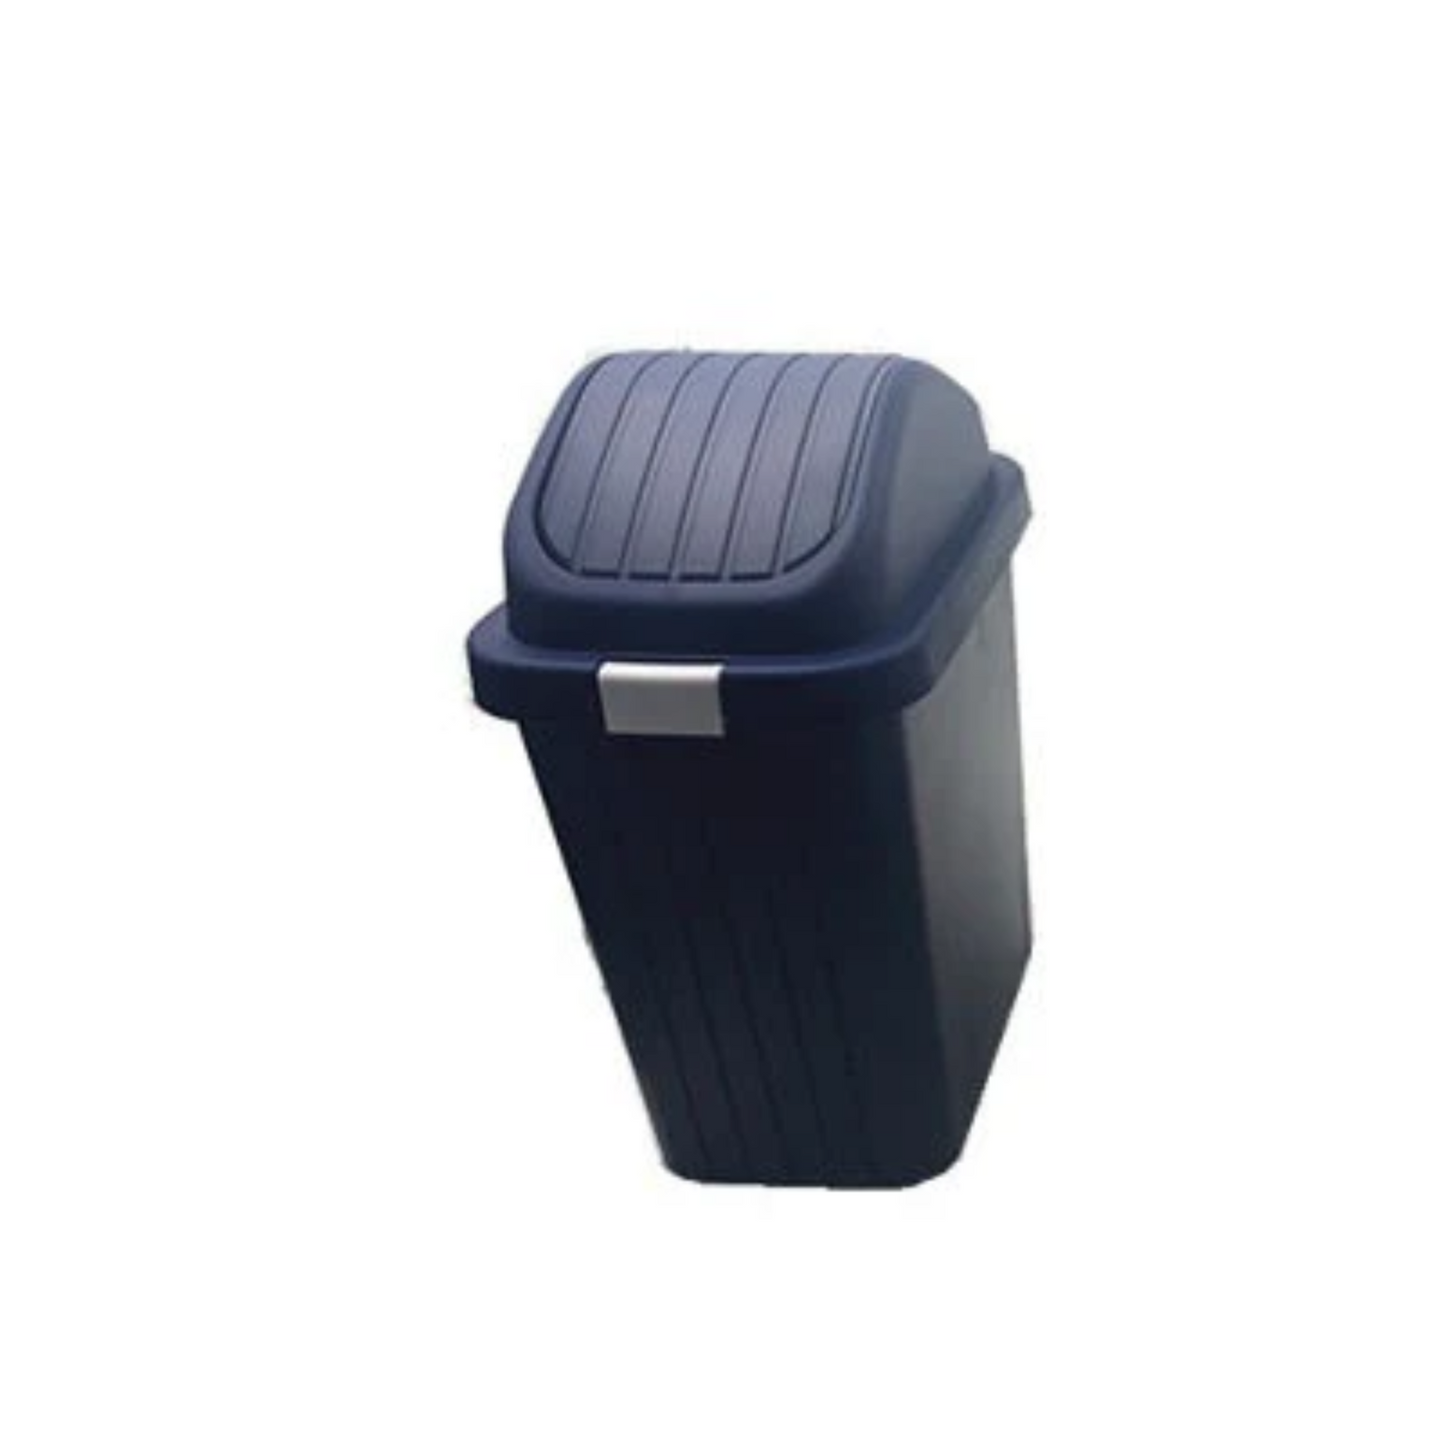 SWING TOP TRASH CAN 14.4in